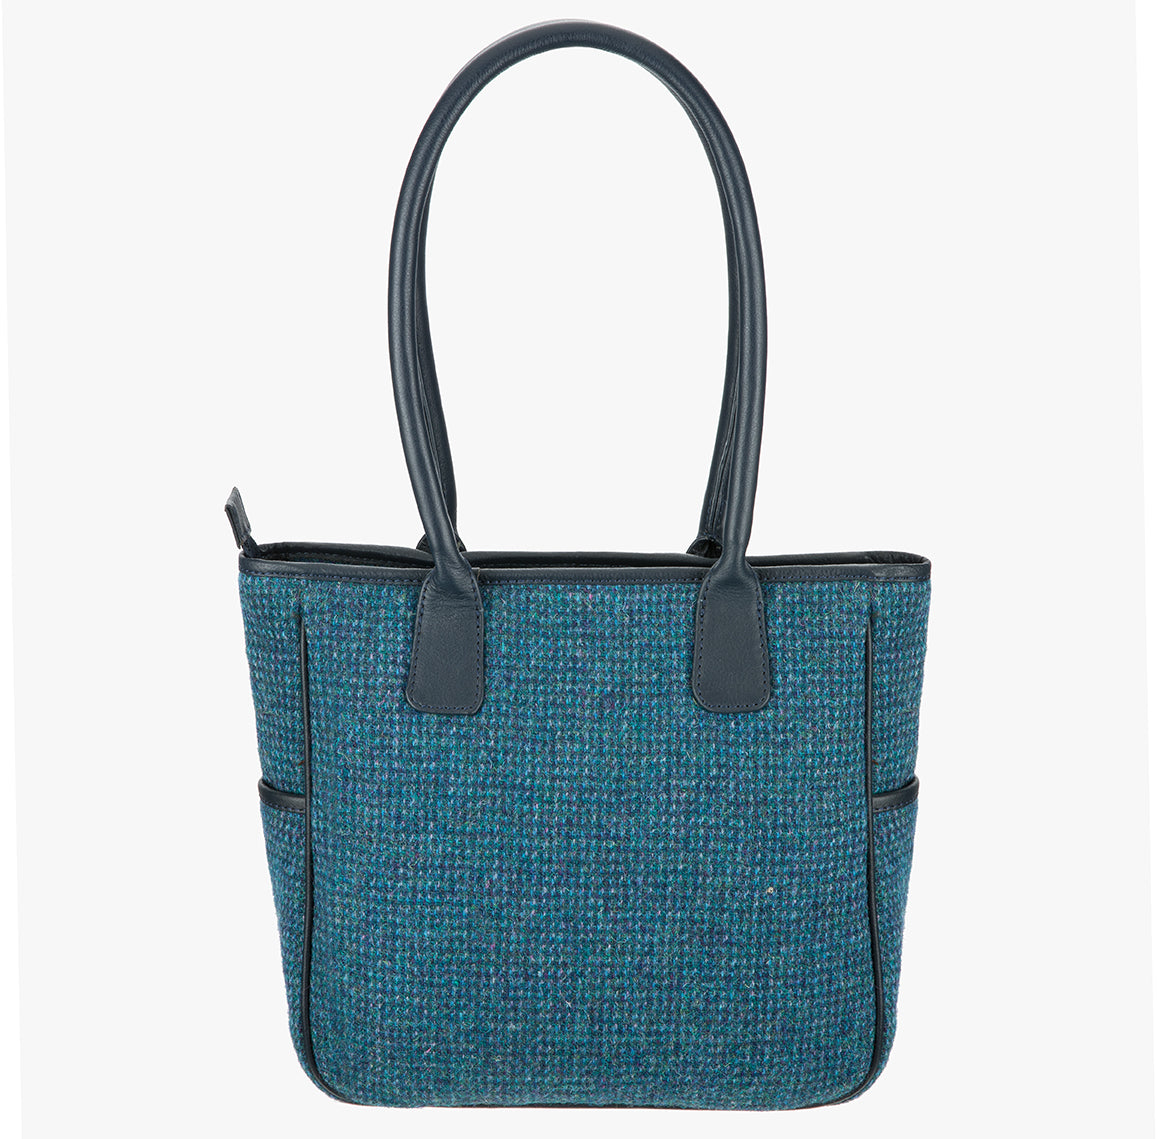 Showing the reverse of this Harris Tweed tote bag with handles that go over the shoulder. This bag is a teal Harris Tweed bag with black leather handles. It has a pocket on each side of the bag trimmed with black leather.